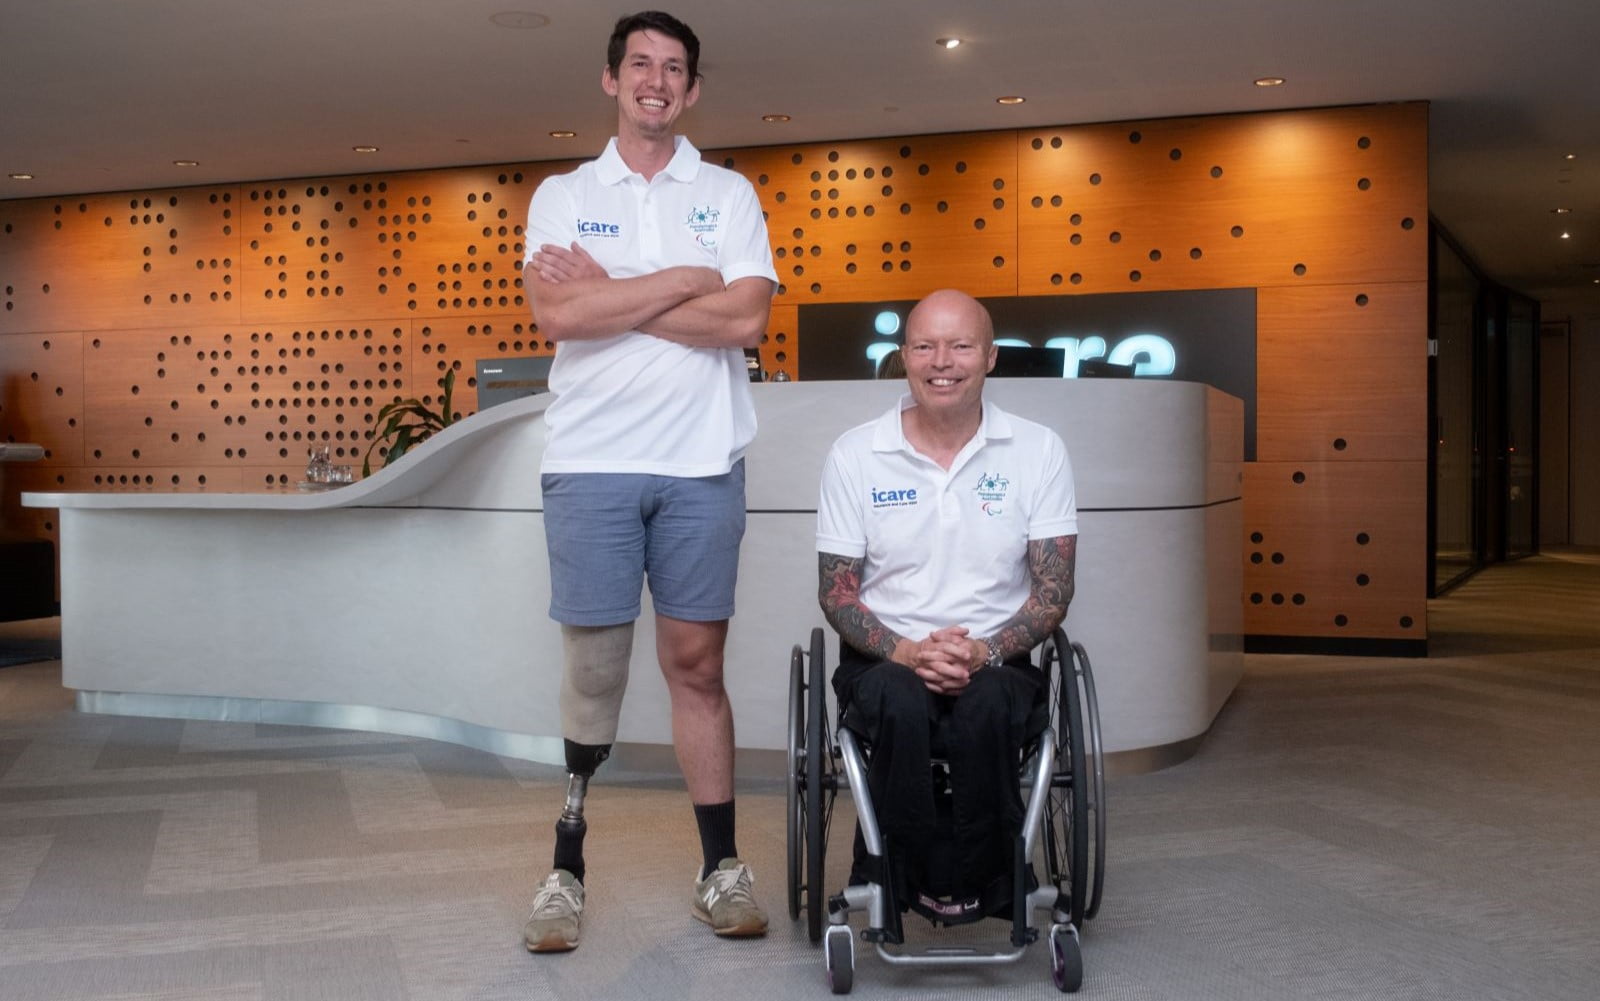 Two new Paralympic speakers join the icare team